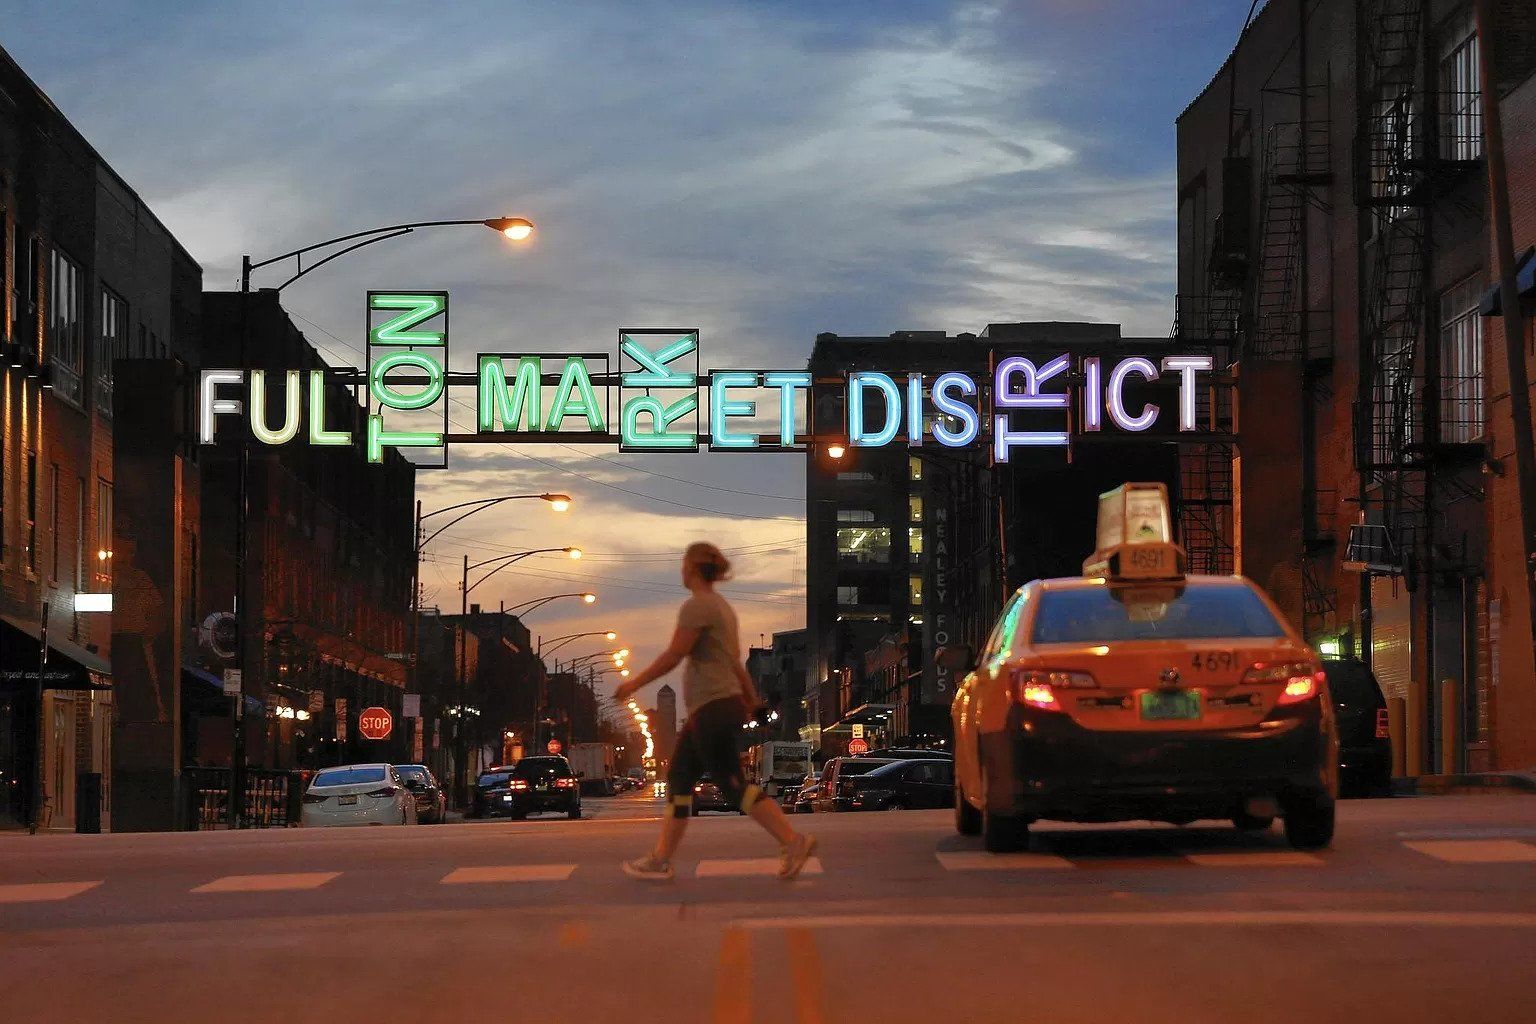 A man is crossing the street in front of a sign that says full market district